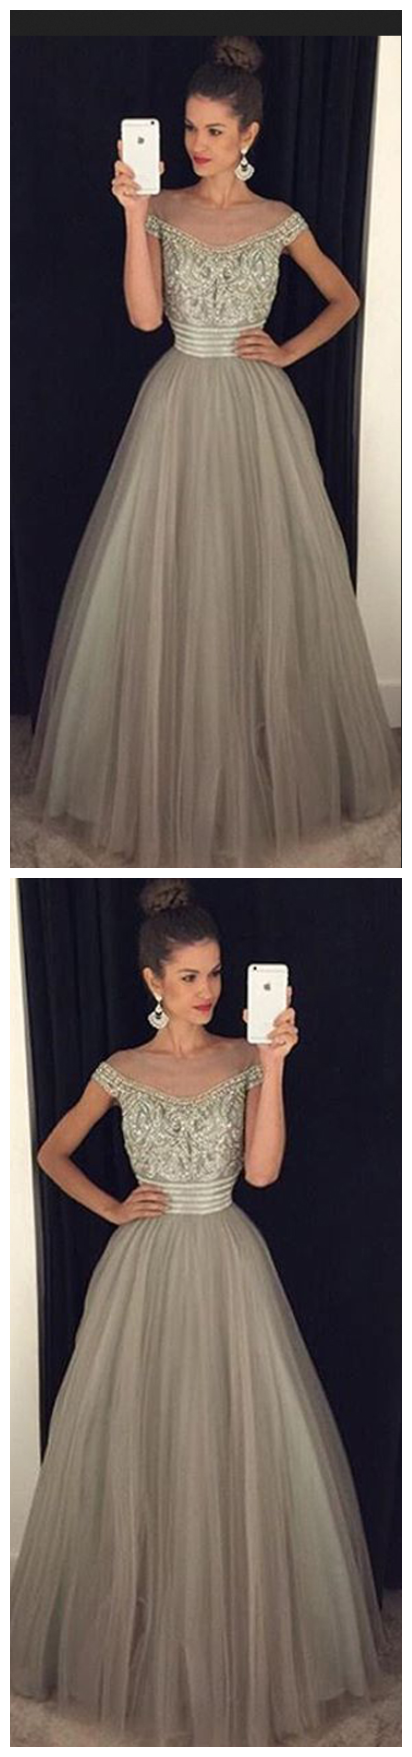 Beadings Crystal Evening Gowns A-line Glamorous Tulle Long Prom Dress